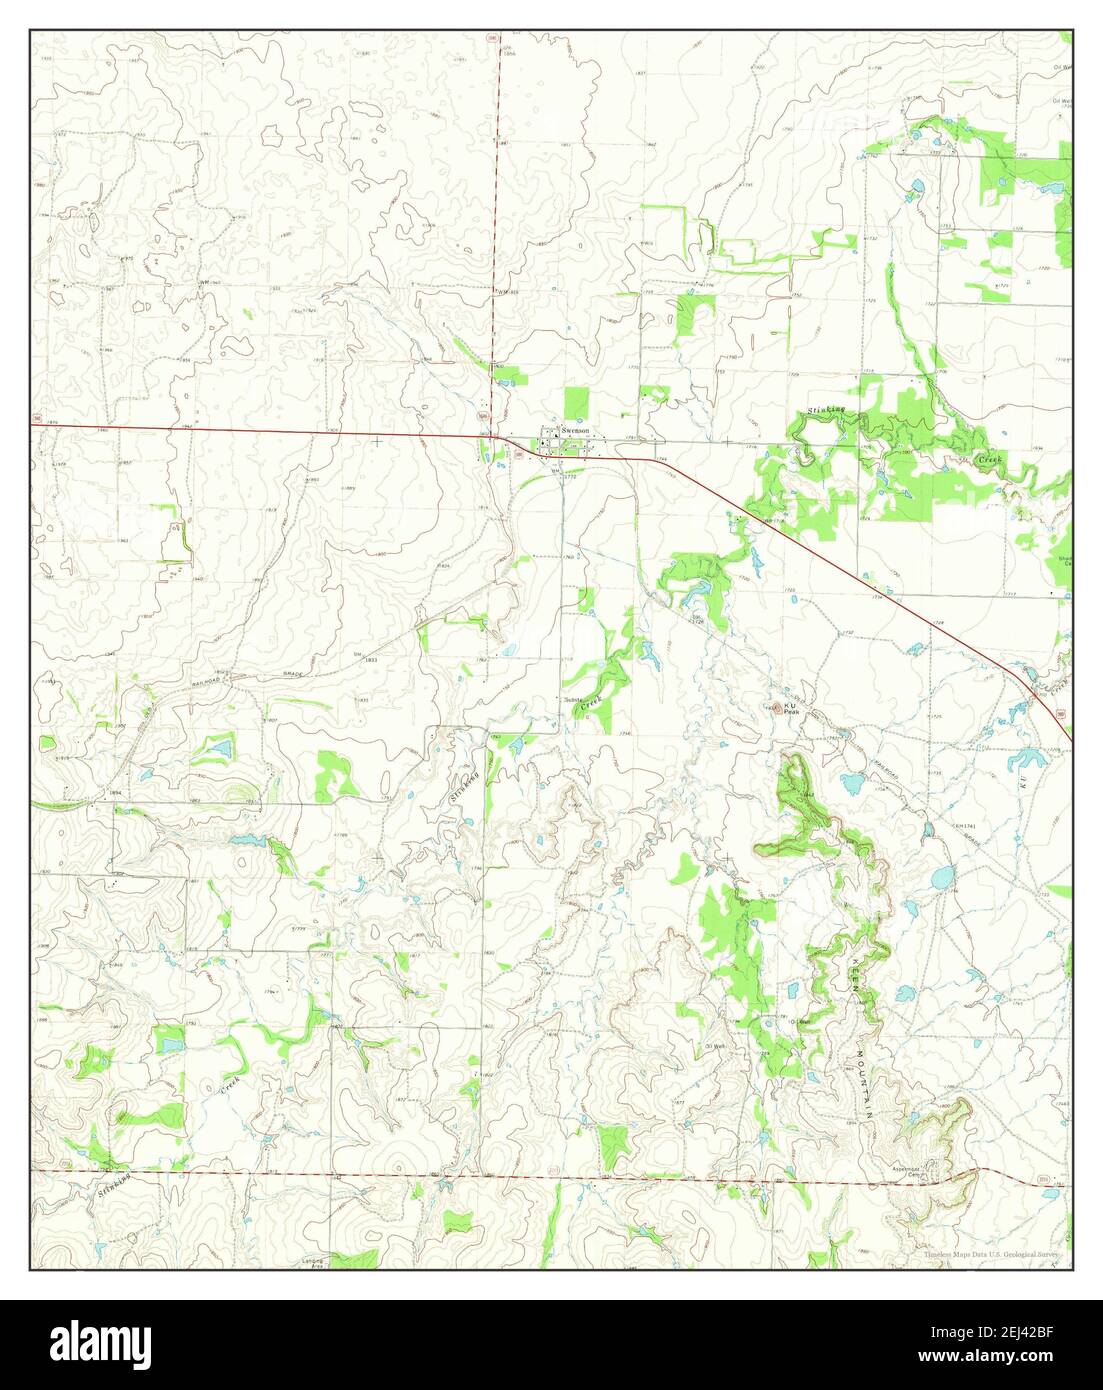 Swenson, Texas, map 1968, 1:24000, United States of America by Timeless Maps, data U.S. Geological Survey Stock Photo